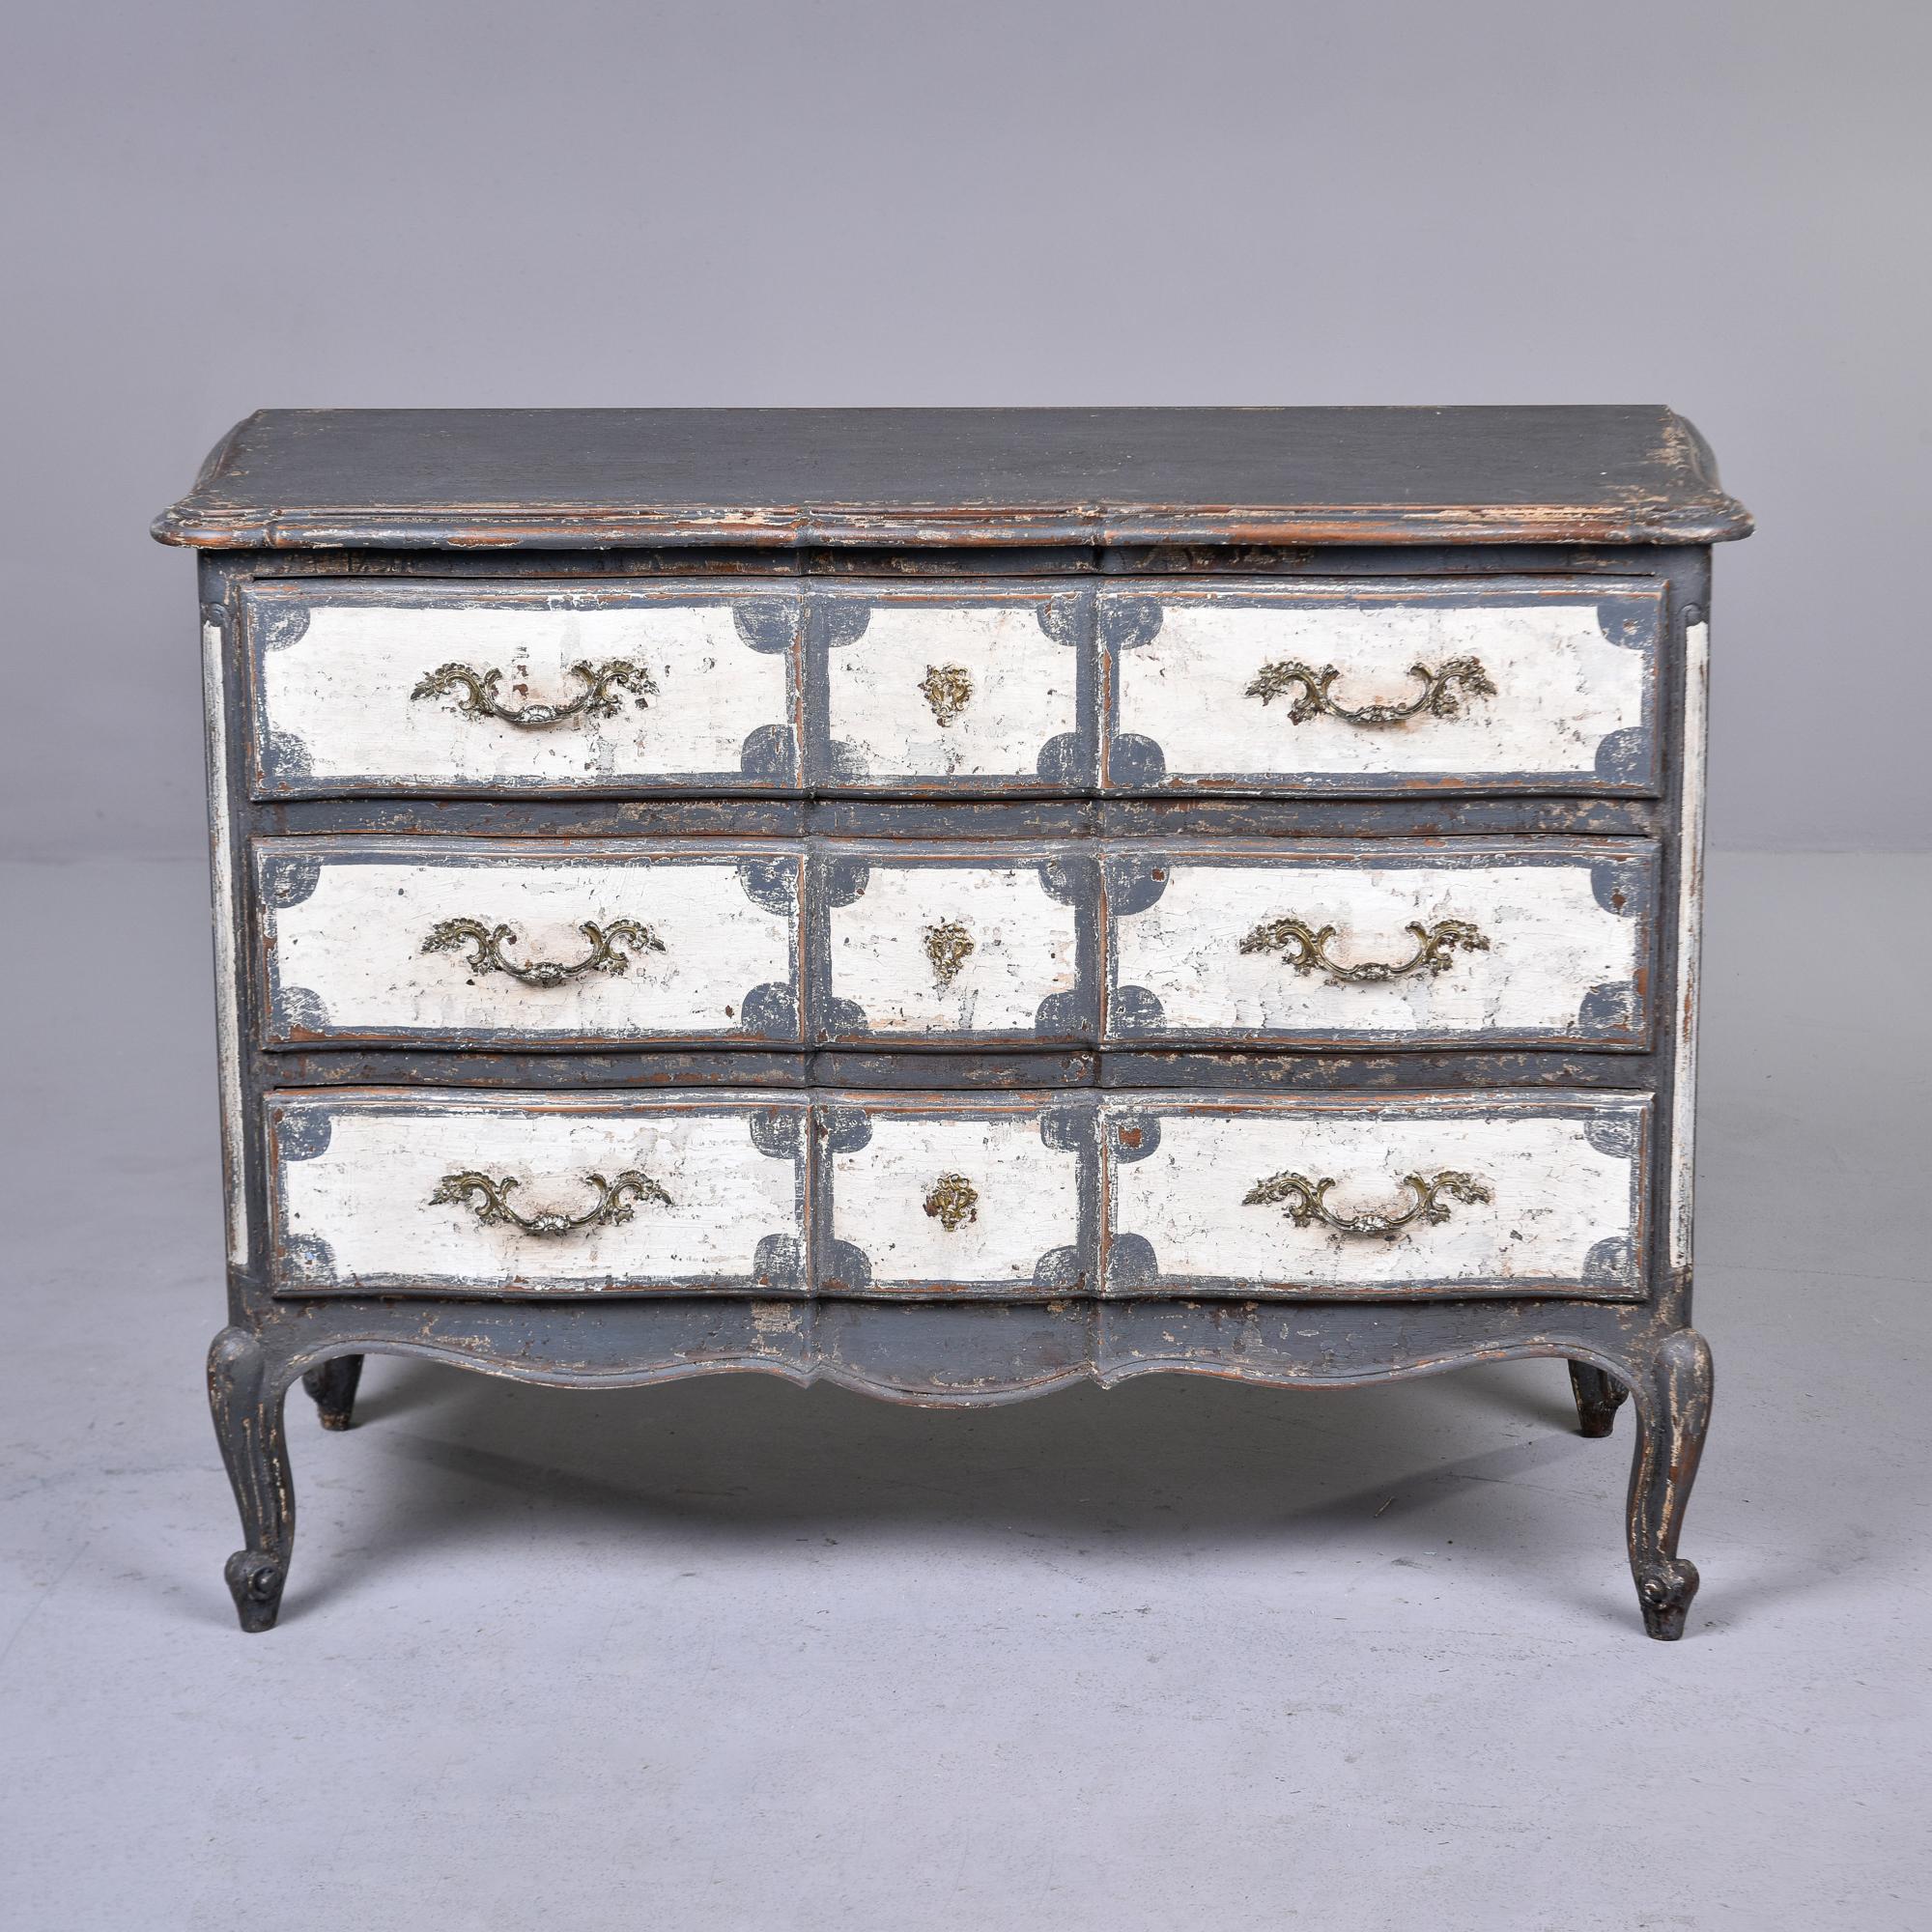 Found in France, this three drawer chest dates from approximately 1900. Original hardware, carved details, dovetail construction and classic French-style curved legs. We found this piece as shown, but do not believe the decorative gray and antique